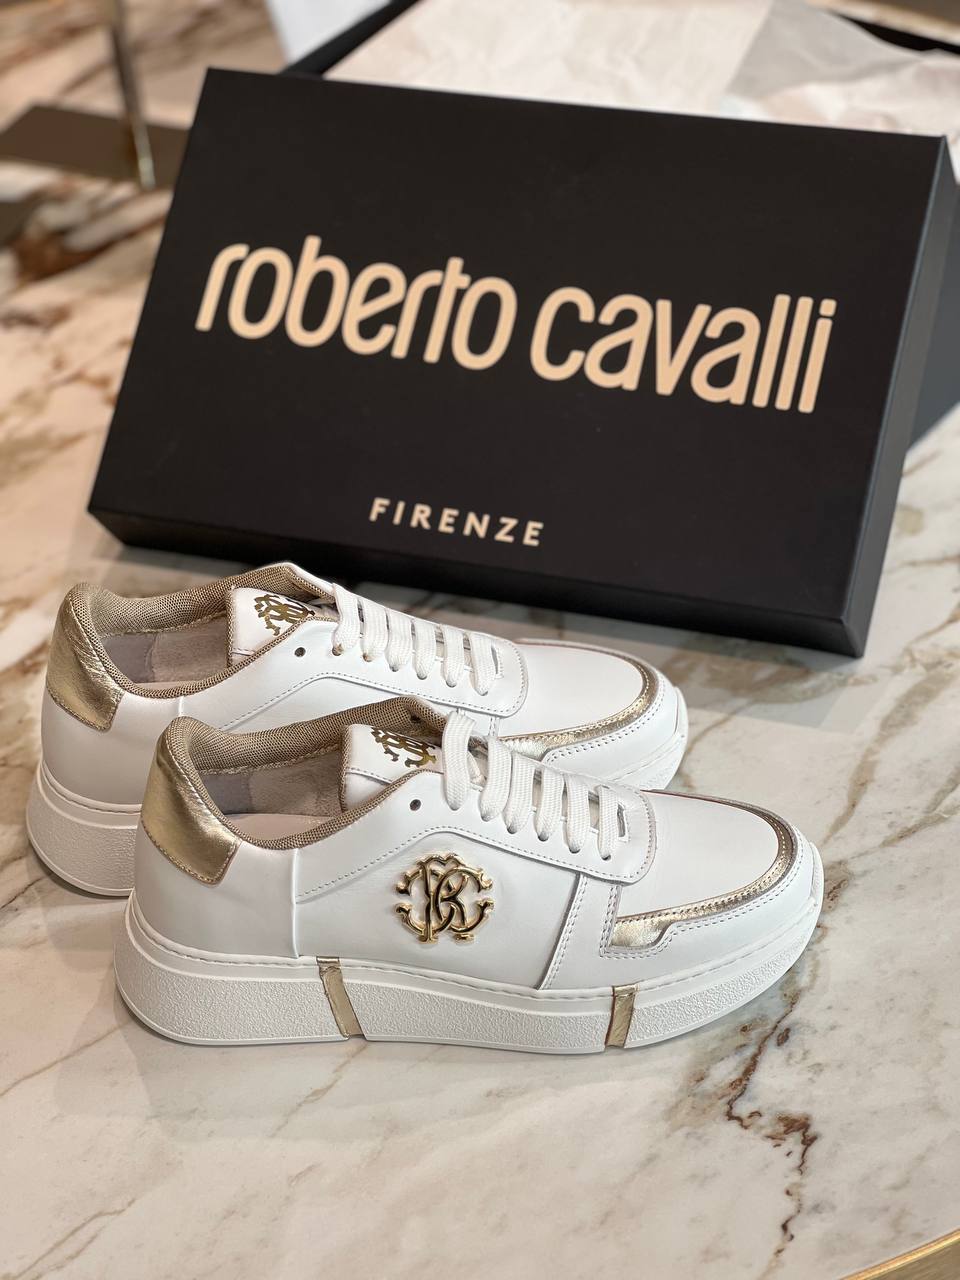 Roberto Cavalli Outlets 4423